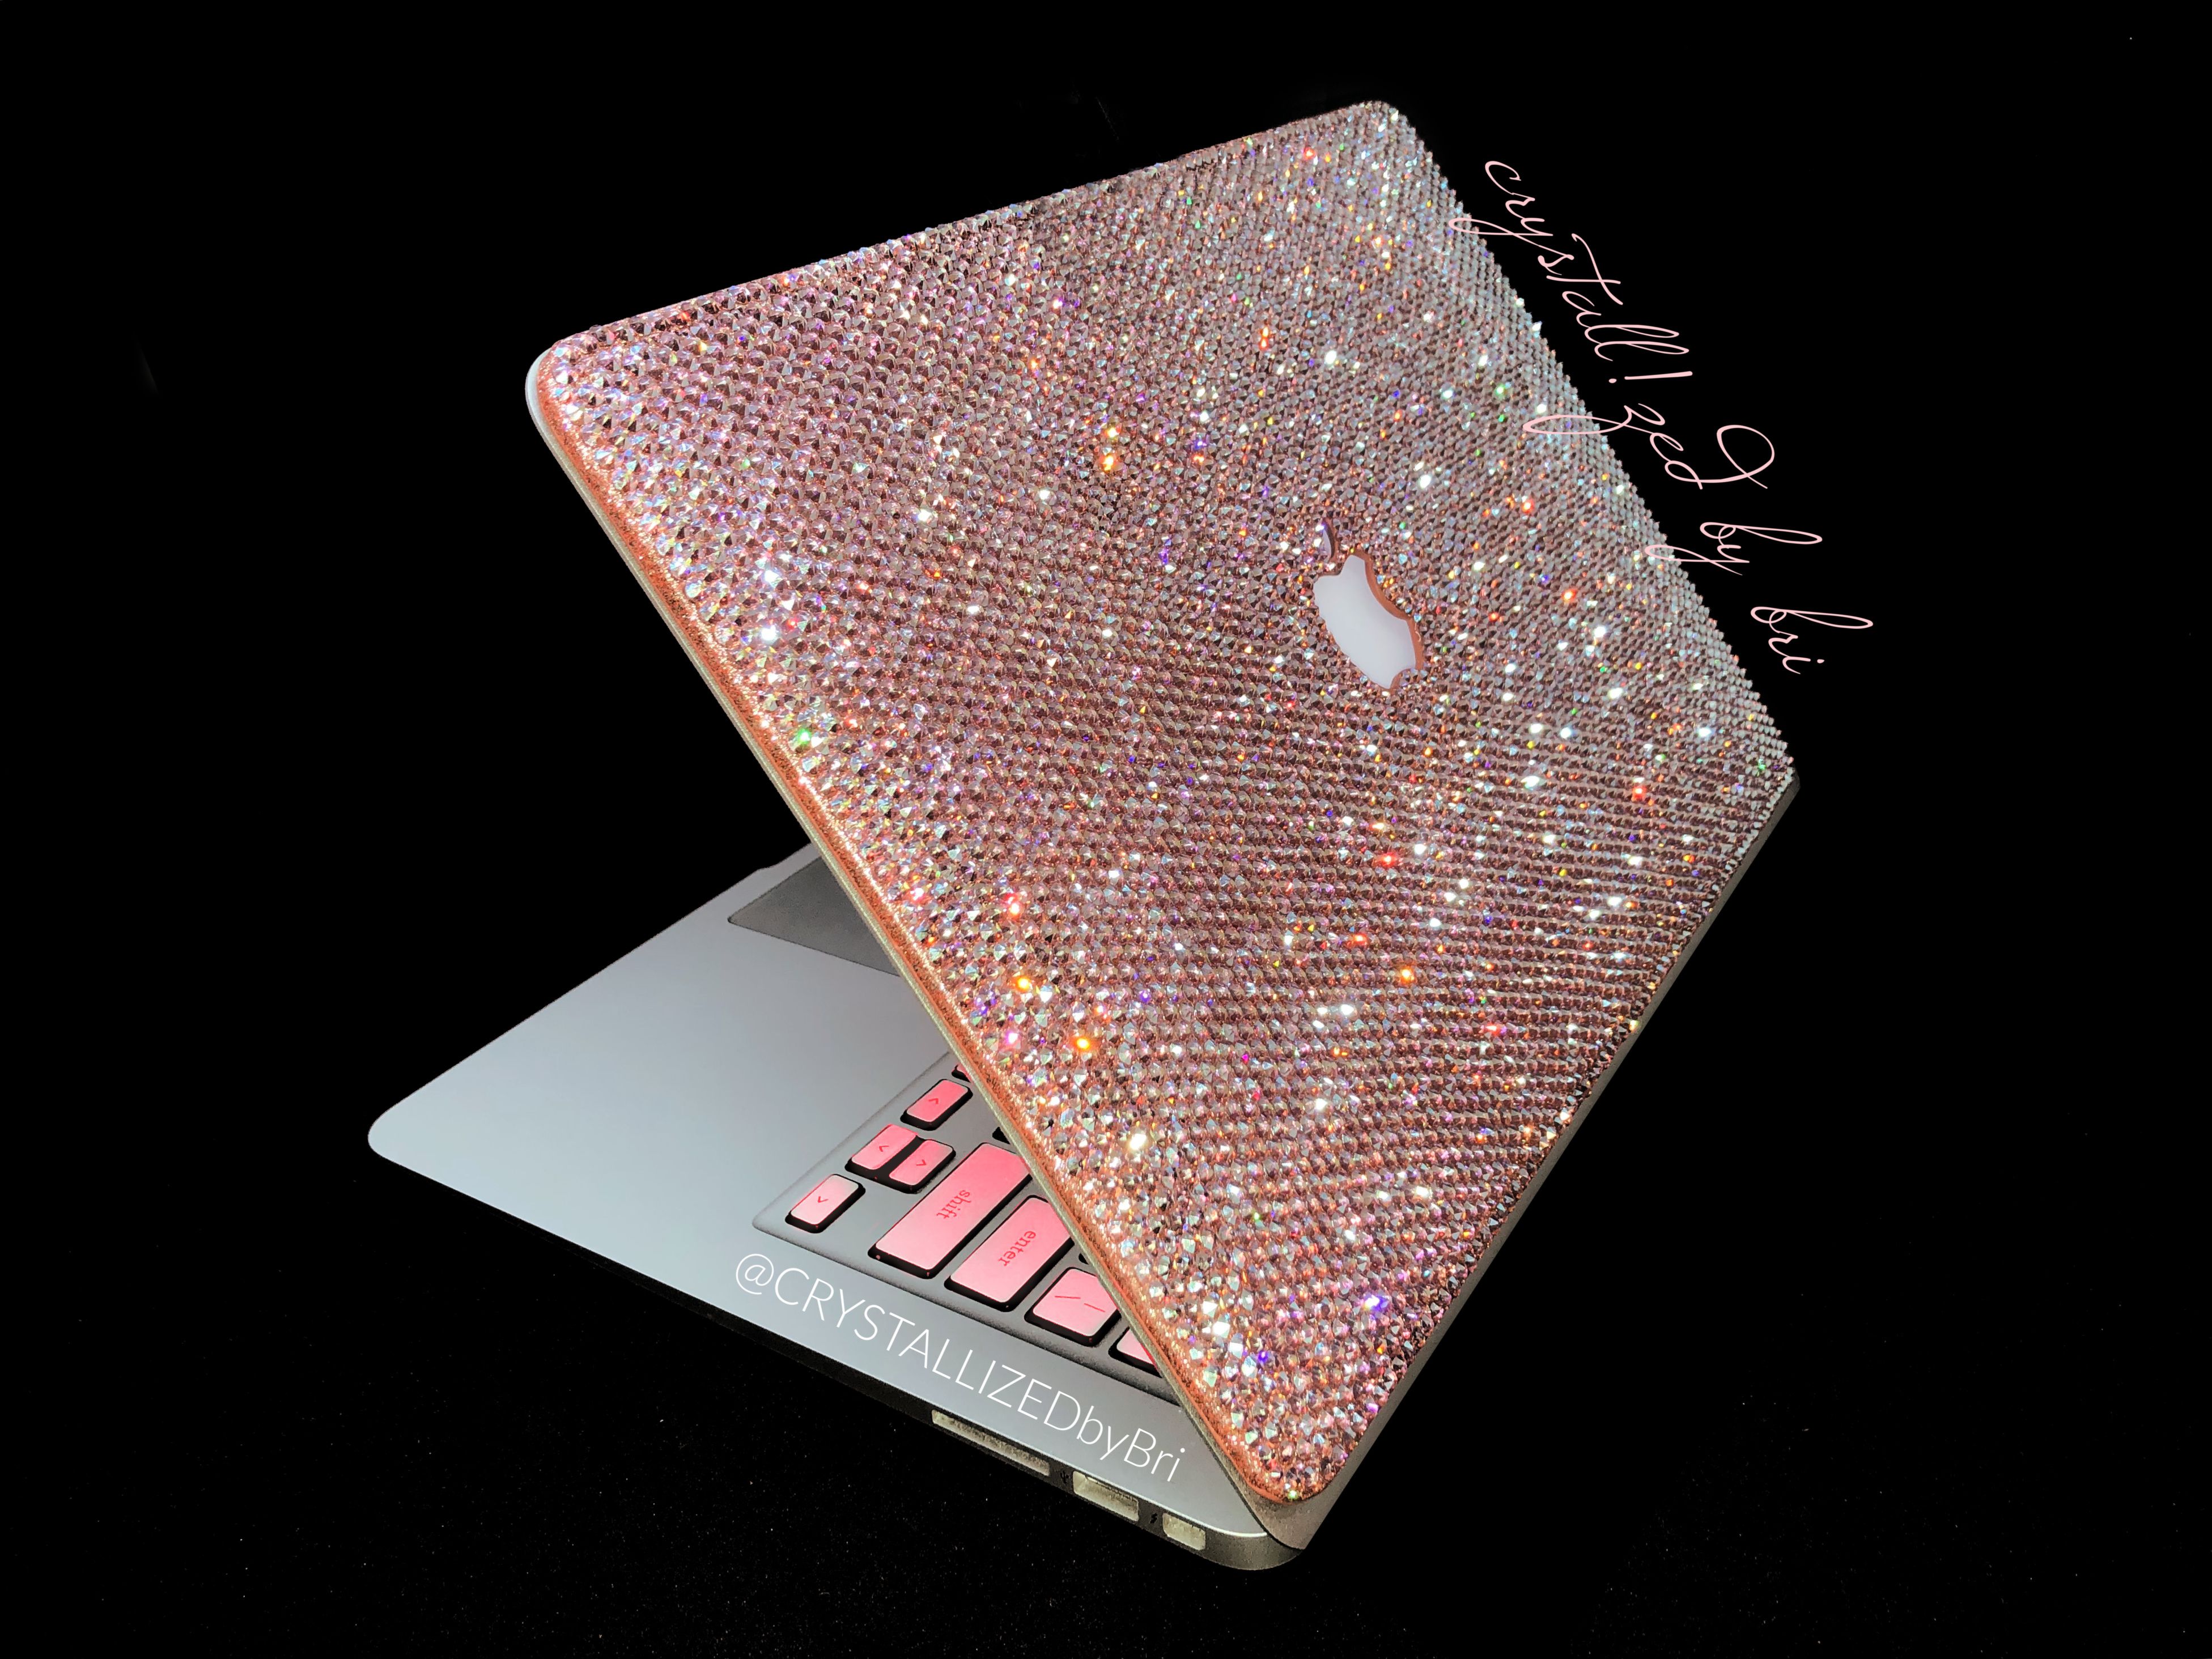 Buy Hand Crafted 15 Mac Crystallized Laptop Case Macbook Pro Apple Tech  Bling European Crystals Bedazzled, made to order from CRYSTALL!ZED by Bri,  LLC